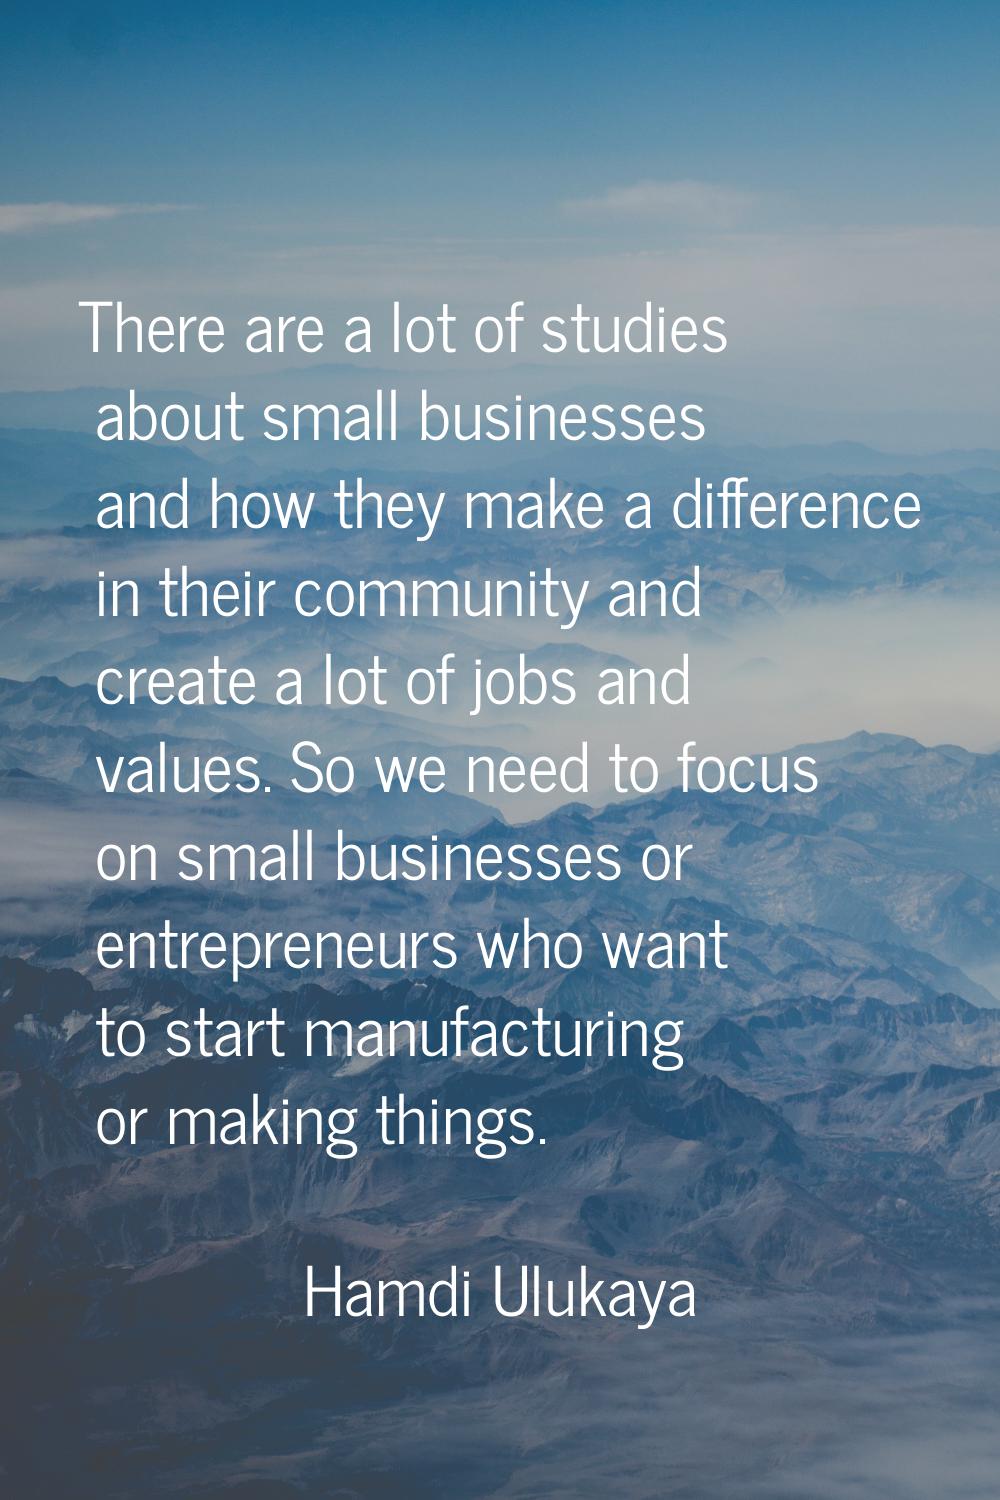 There are a lot of studies about small businesses and how they make a difference in their community